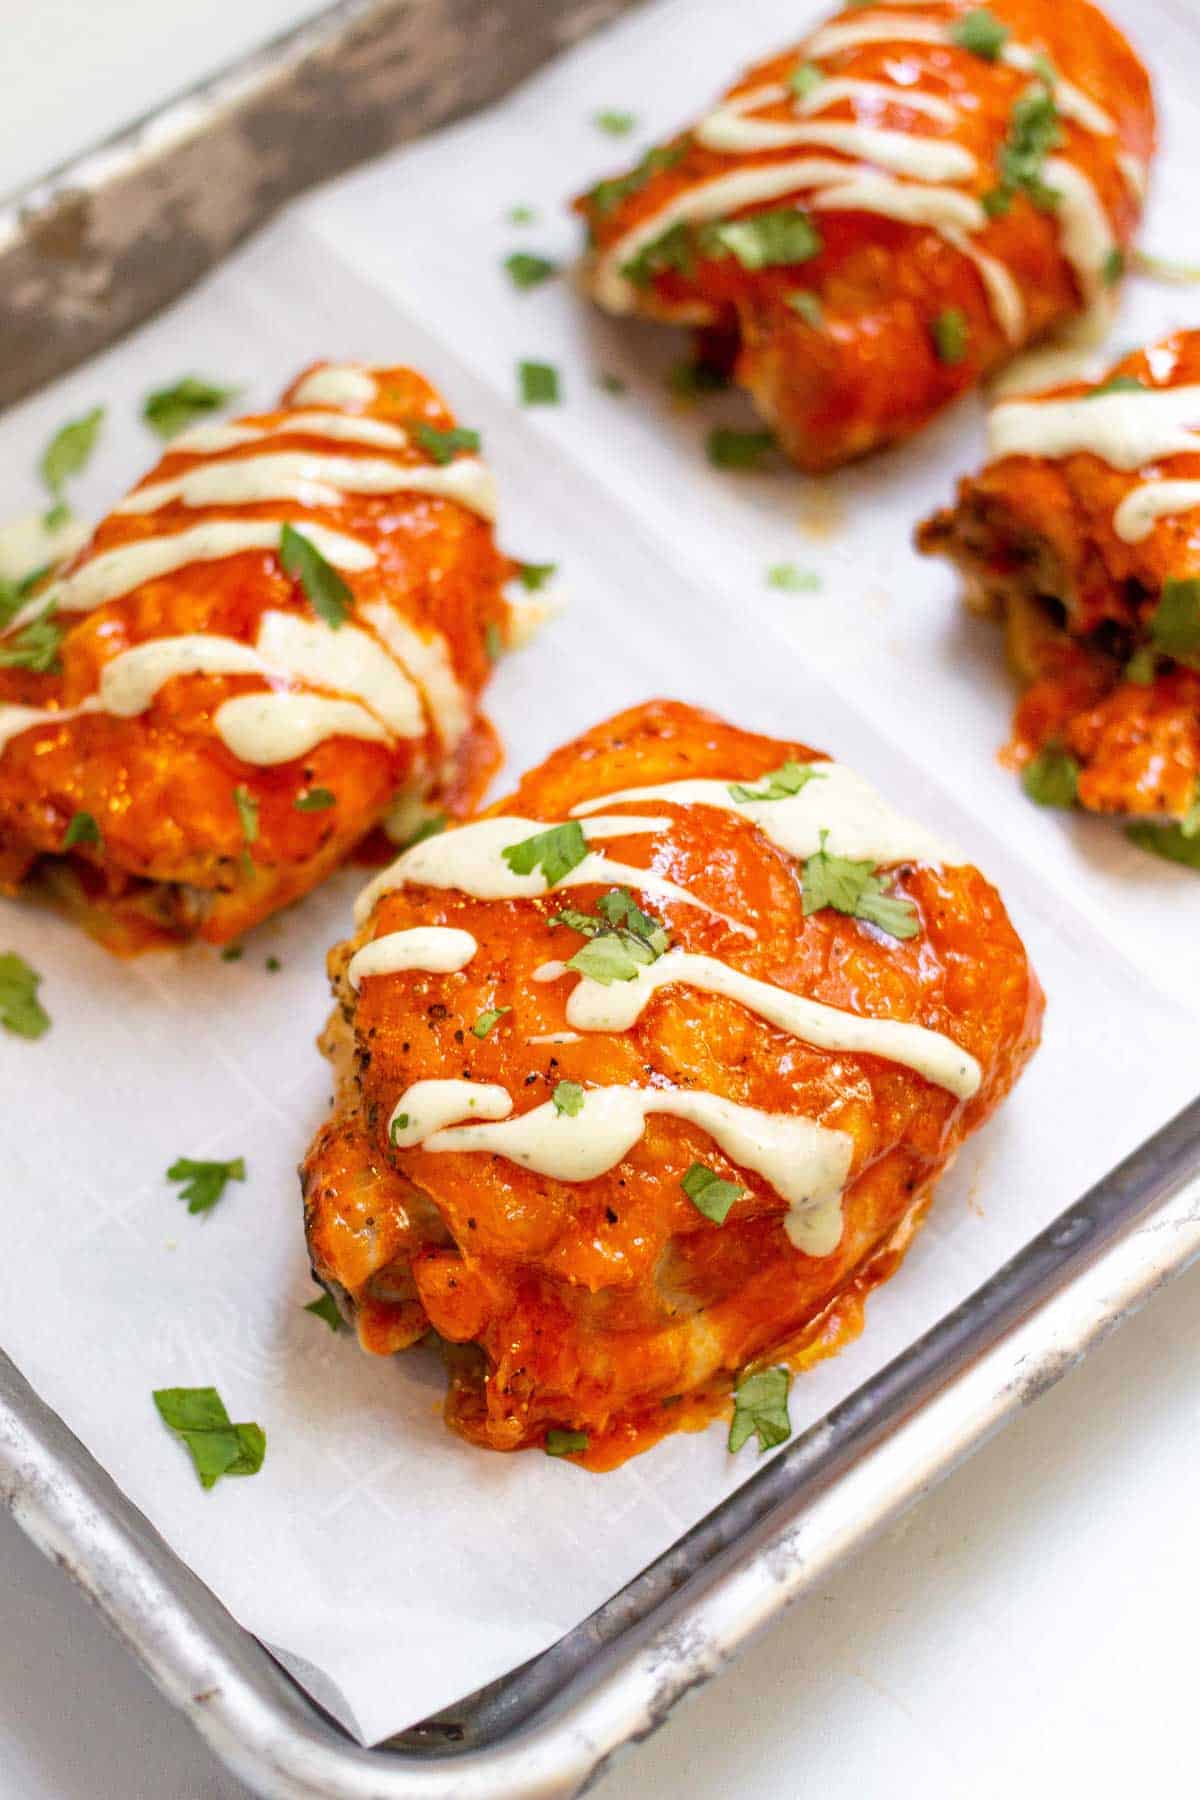 Buffalo chicken thigh with a drizzle of ranch and fresh parsley